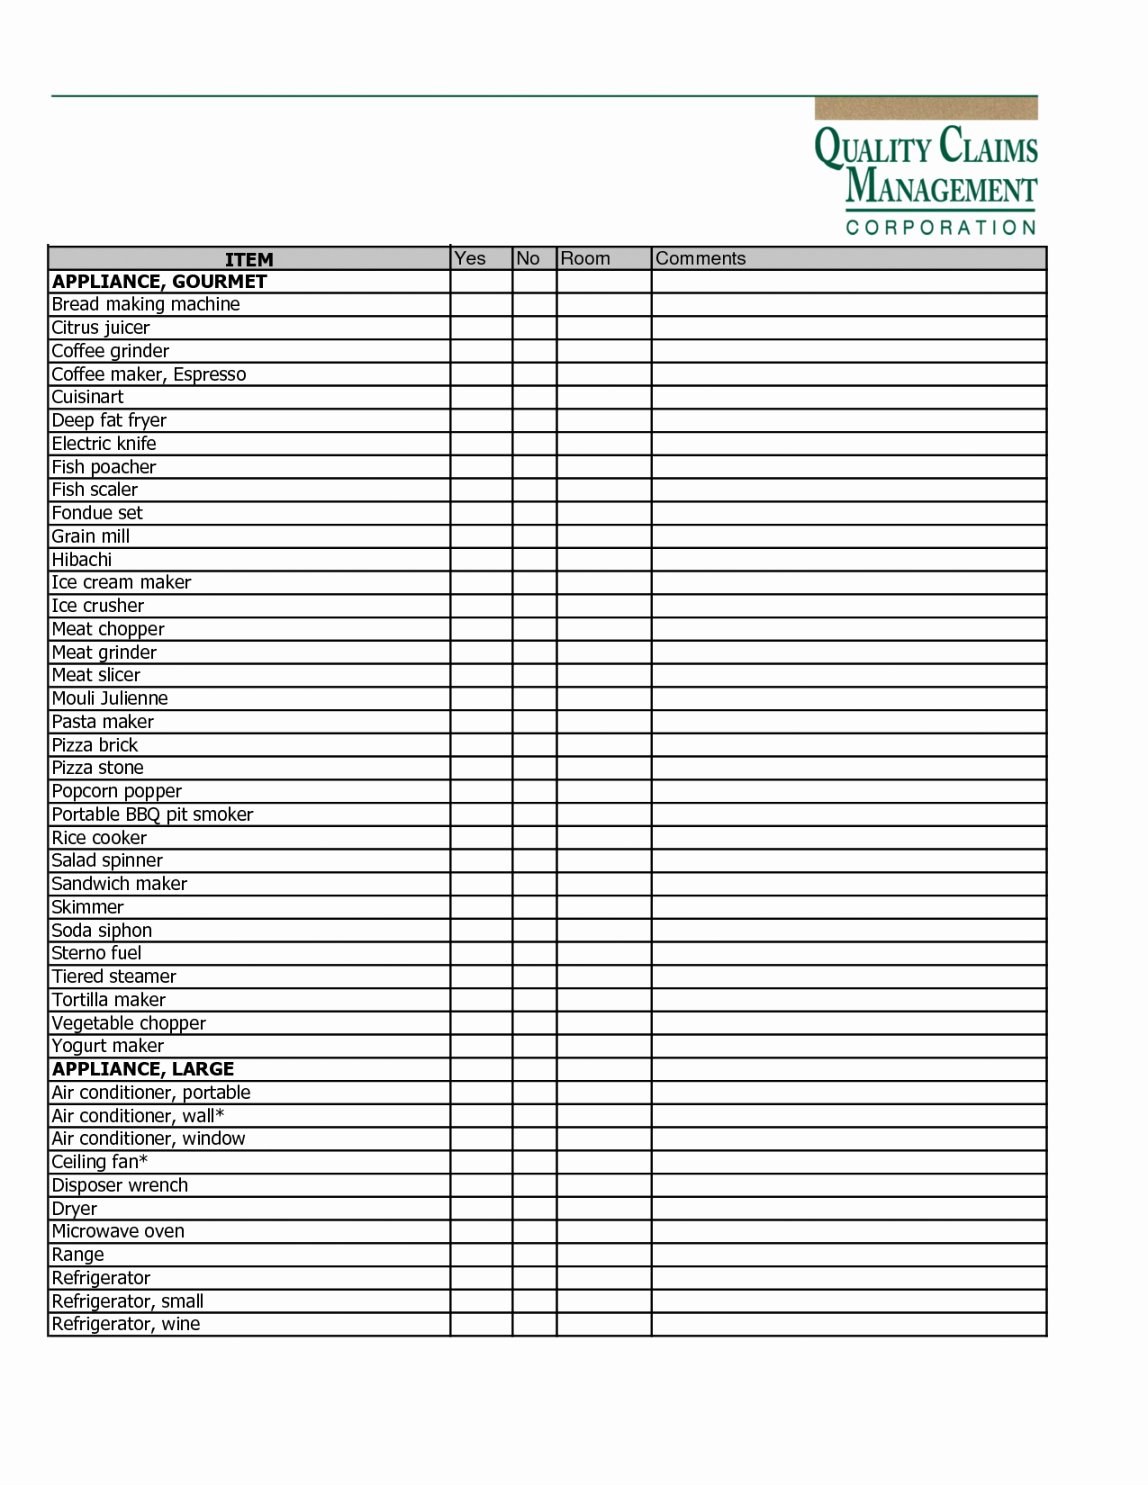 Office Supply Inventory List Template Luxury Free Medical Fice Supply List Example